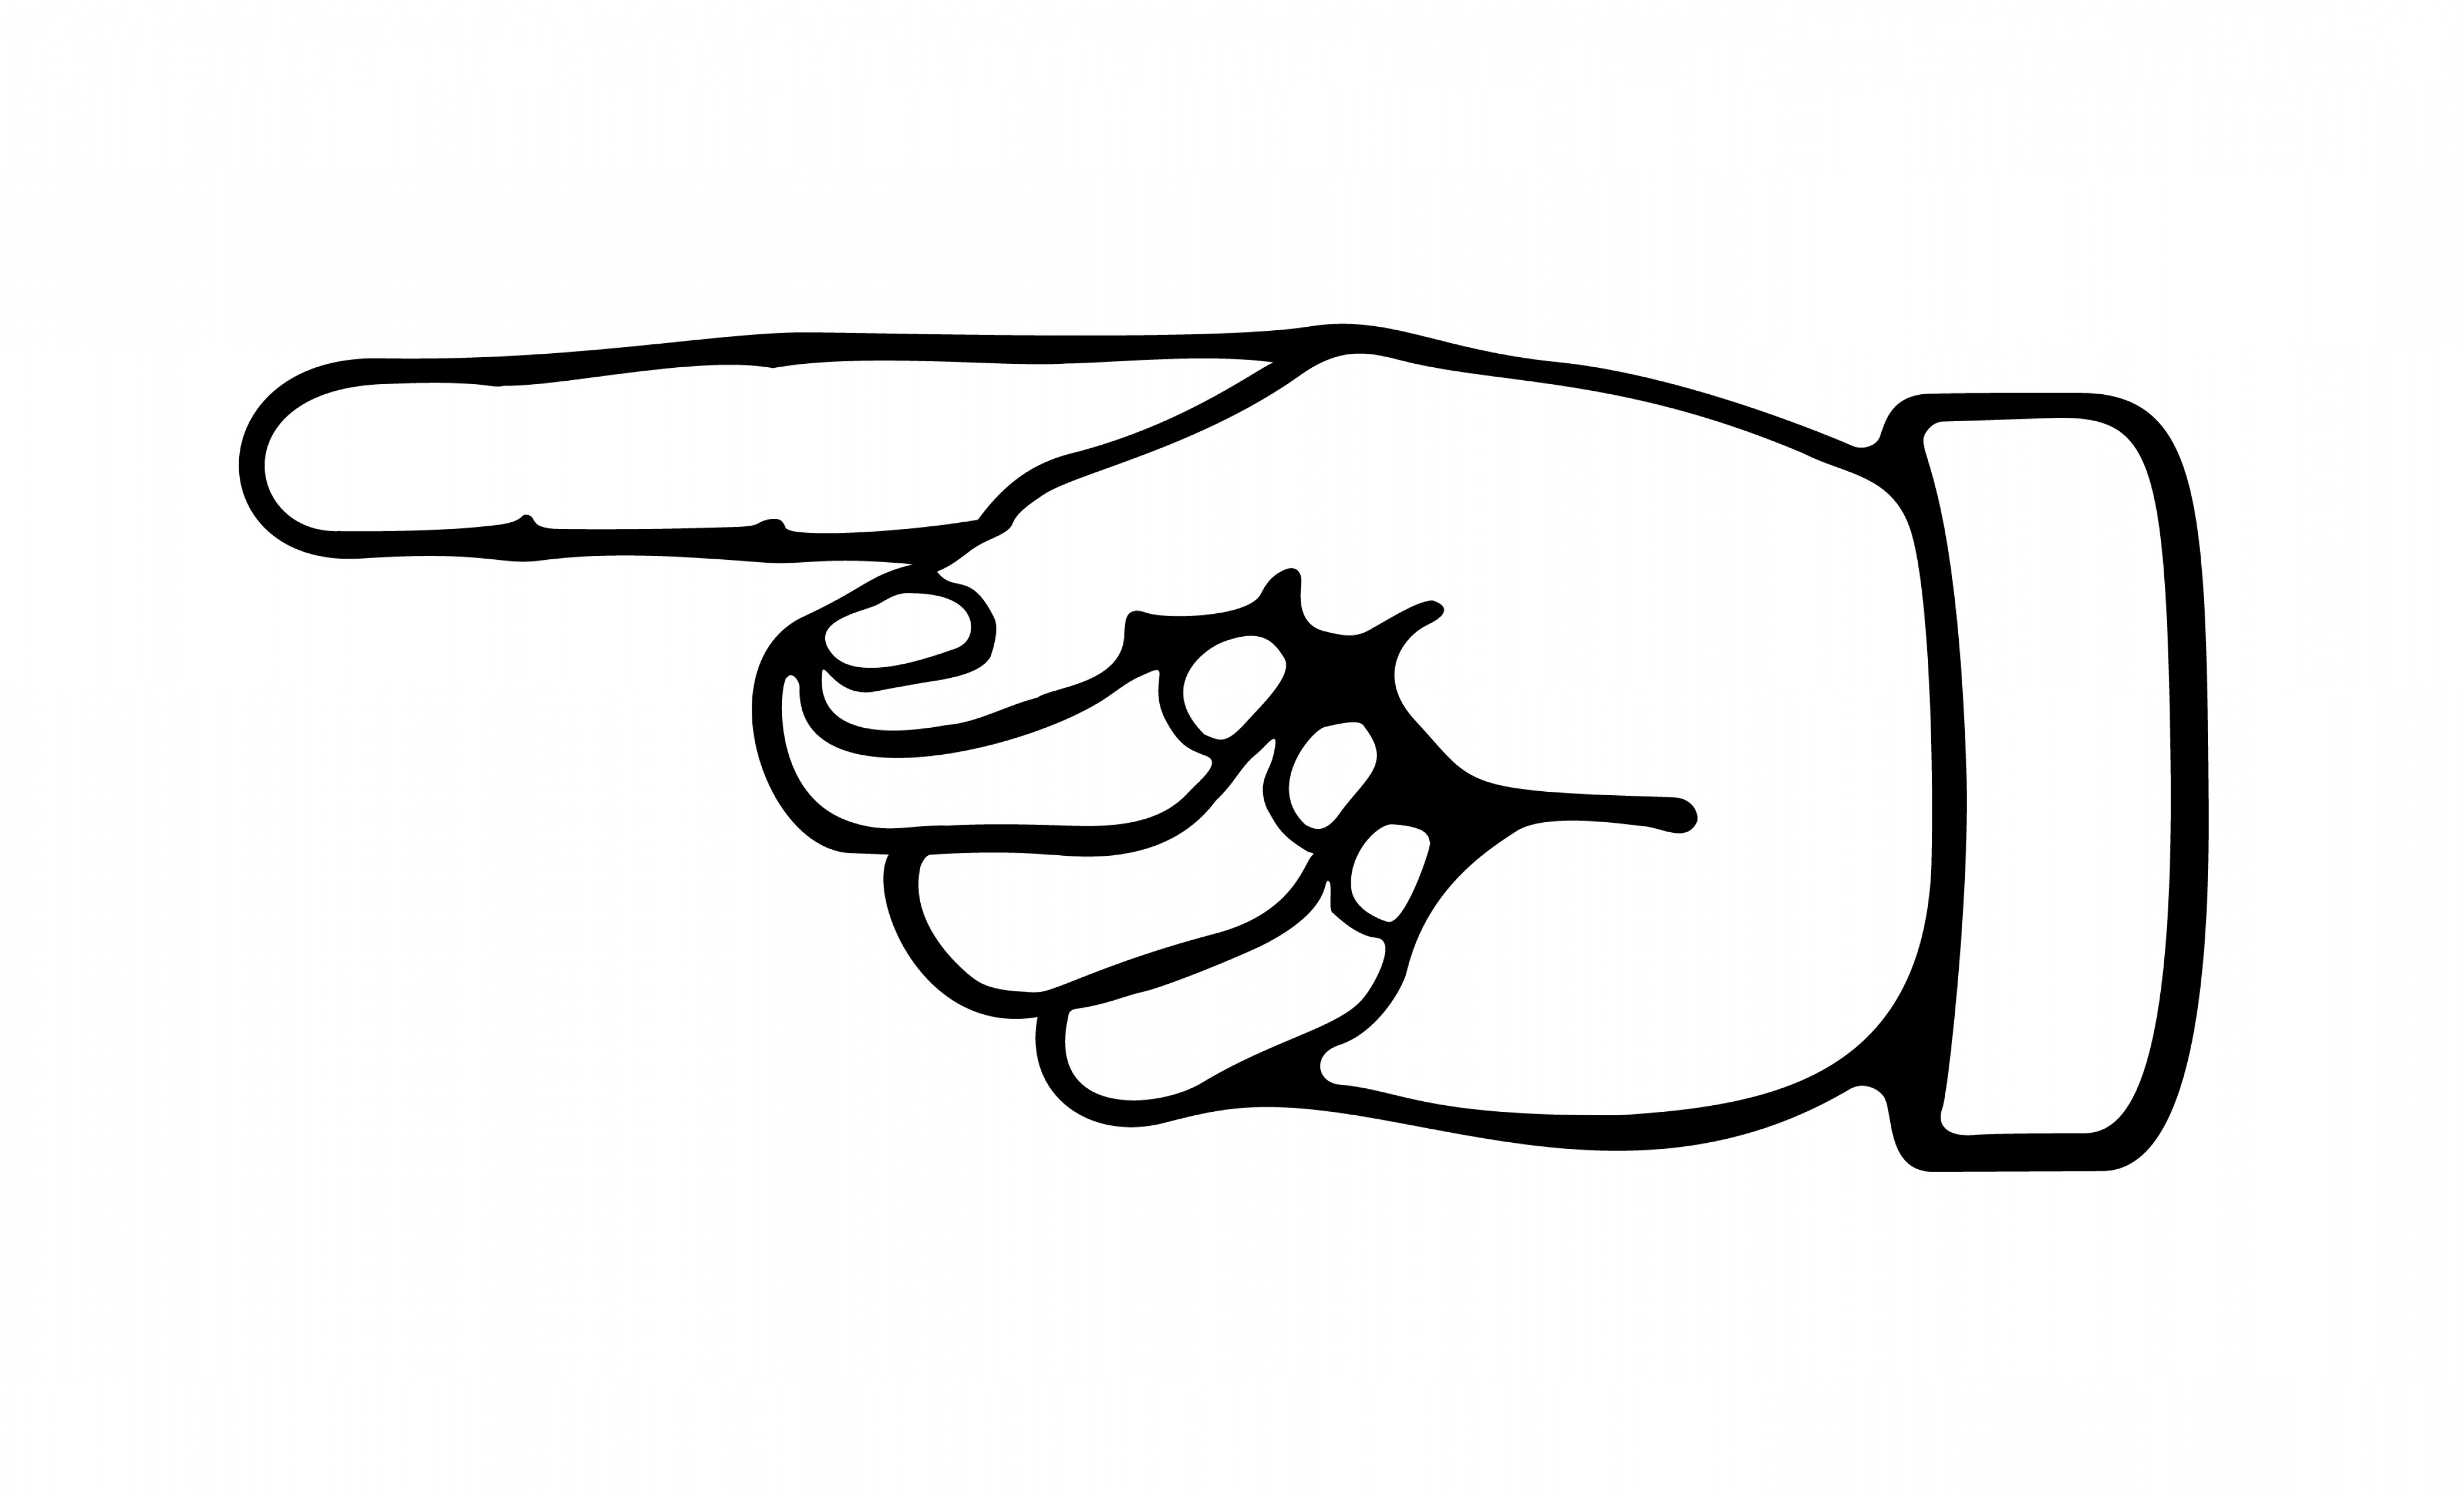 Pointing hand clipart.